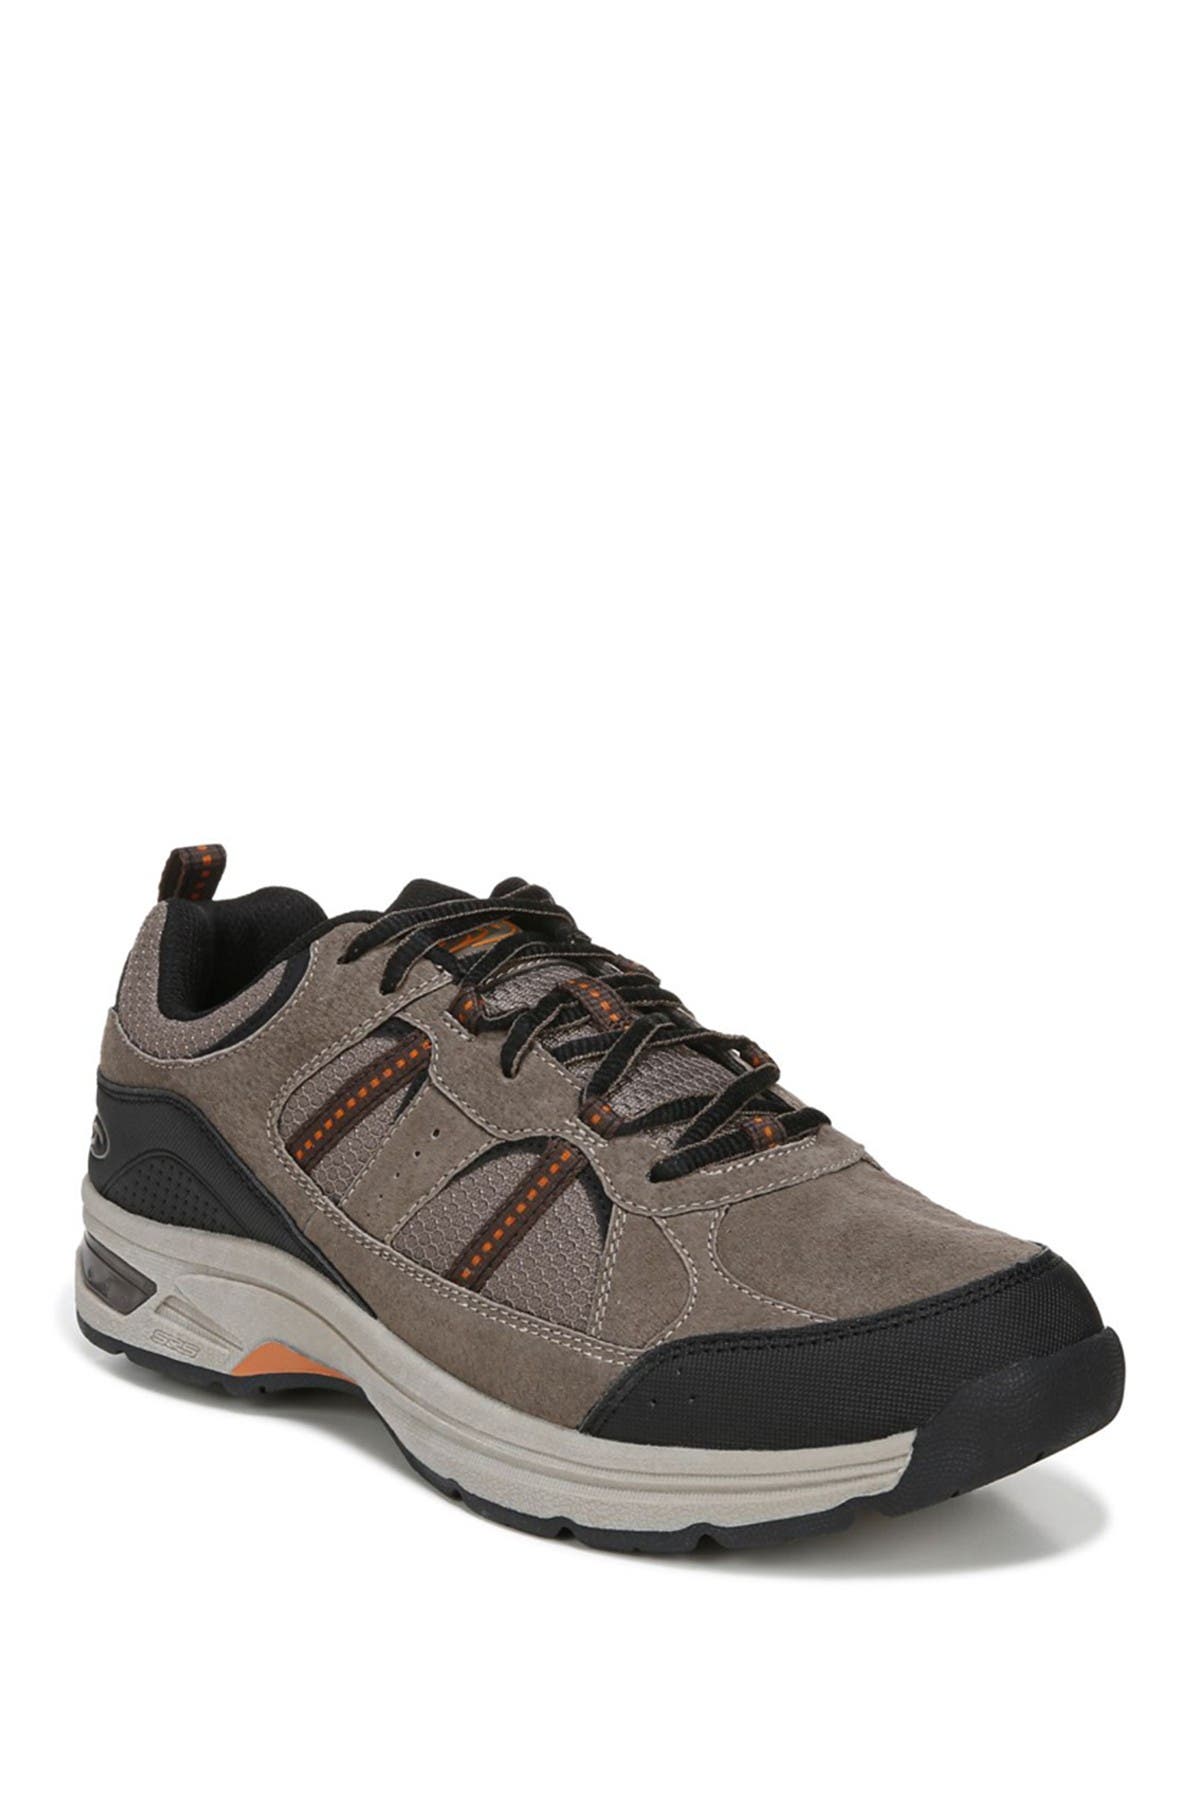 Dr. Scholl's Crossover Sneaker In Taupe